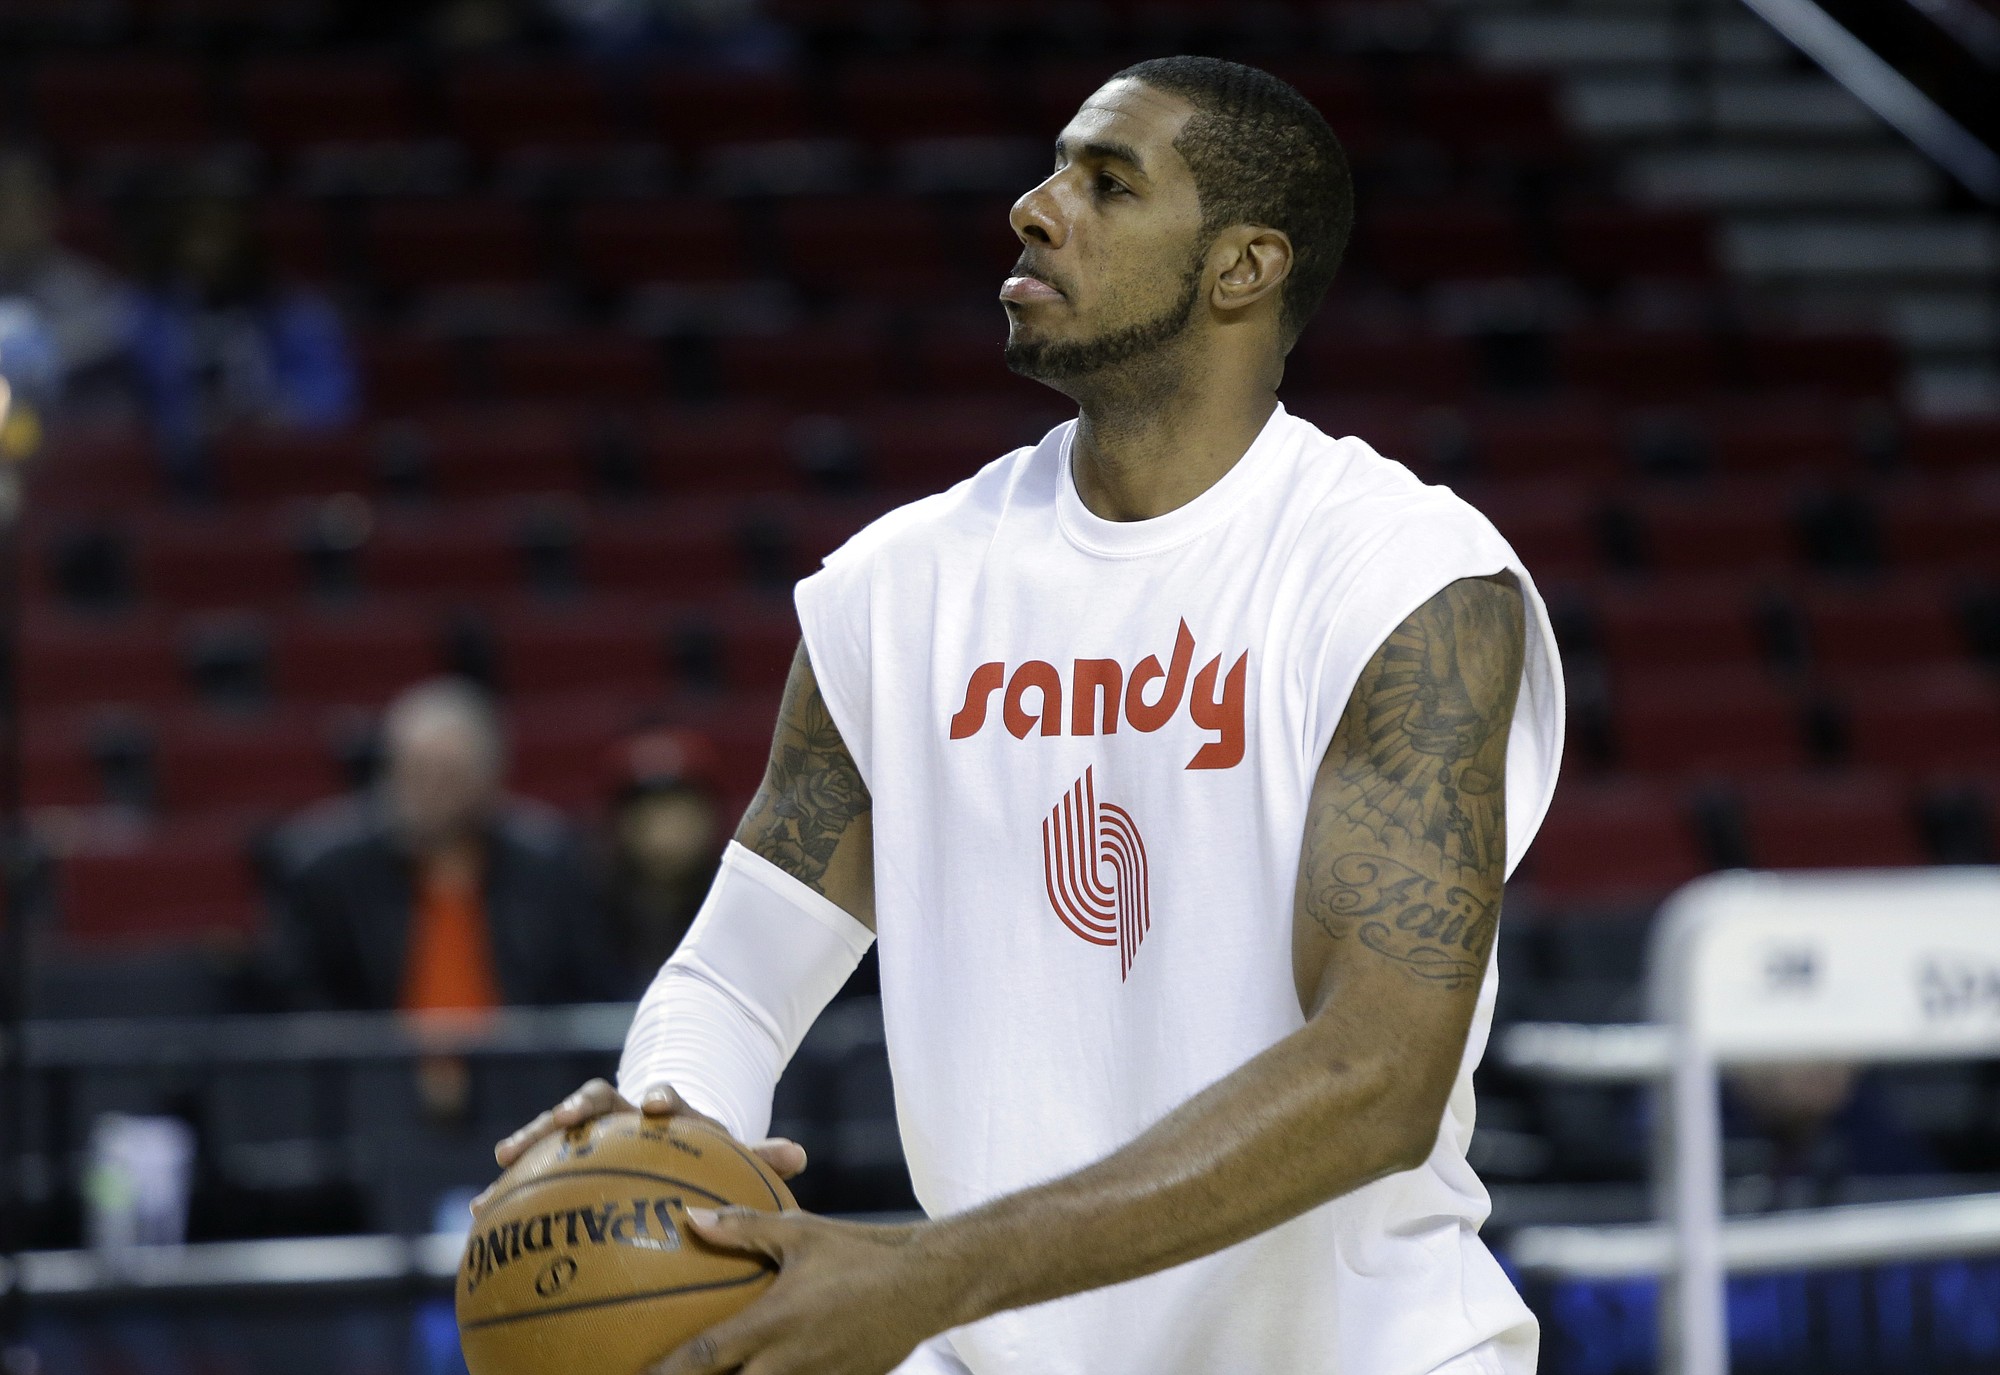 Portland Trail Blazers forward LaMarcus Aldridge wears a warmup shirt in memory of season ticket holder Sandra Zickefoose before their NBA basketball game against the Denver Nuggets in Portland, Ore., Sunday, Nov. 9, 2014. Zickefoose suffered a medical emergency during their game against Dallas Thursday night, was transported to a hospital and subsequently died.